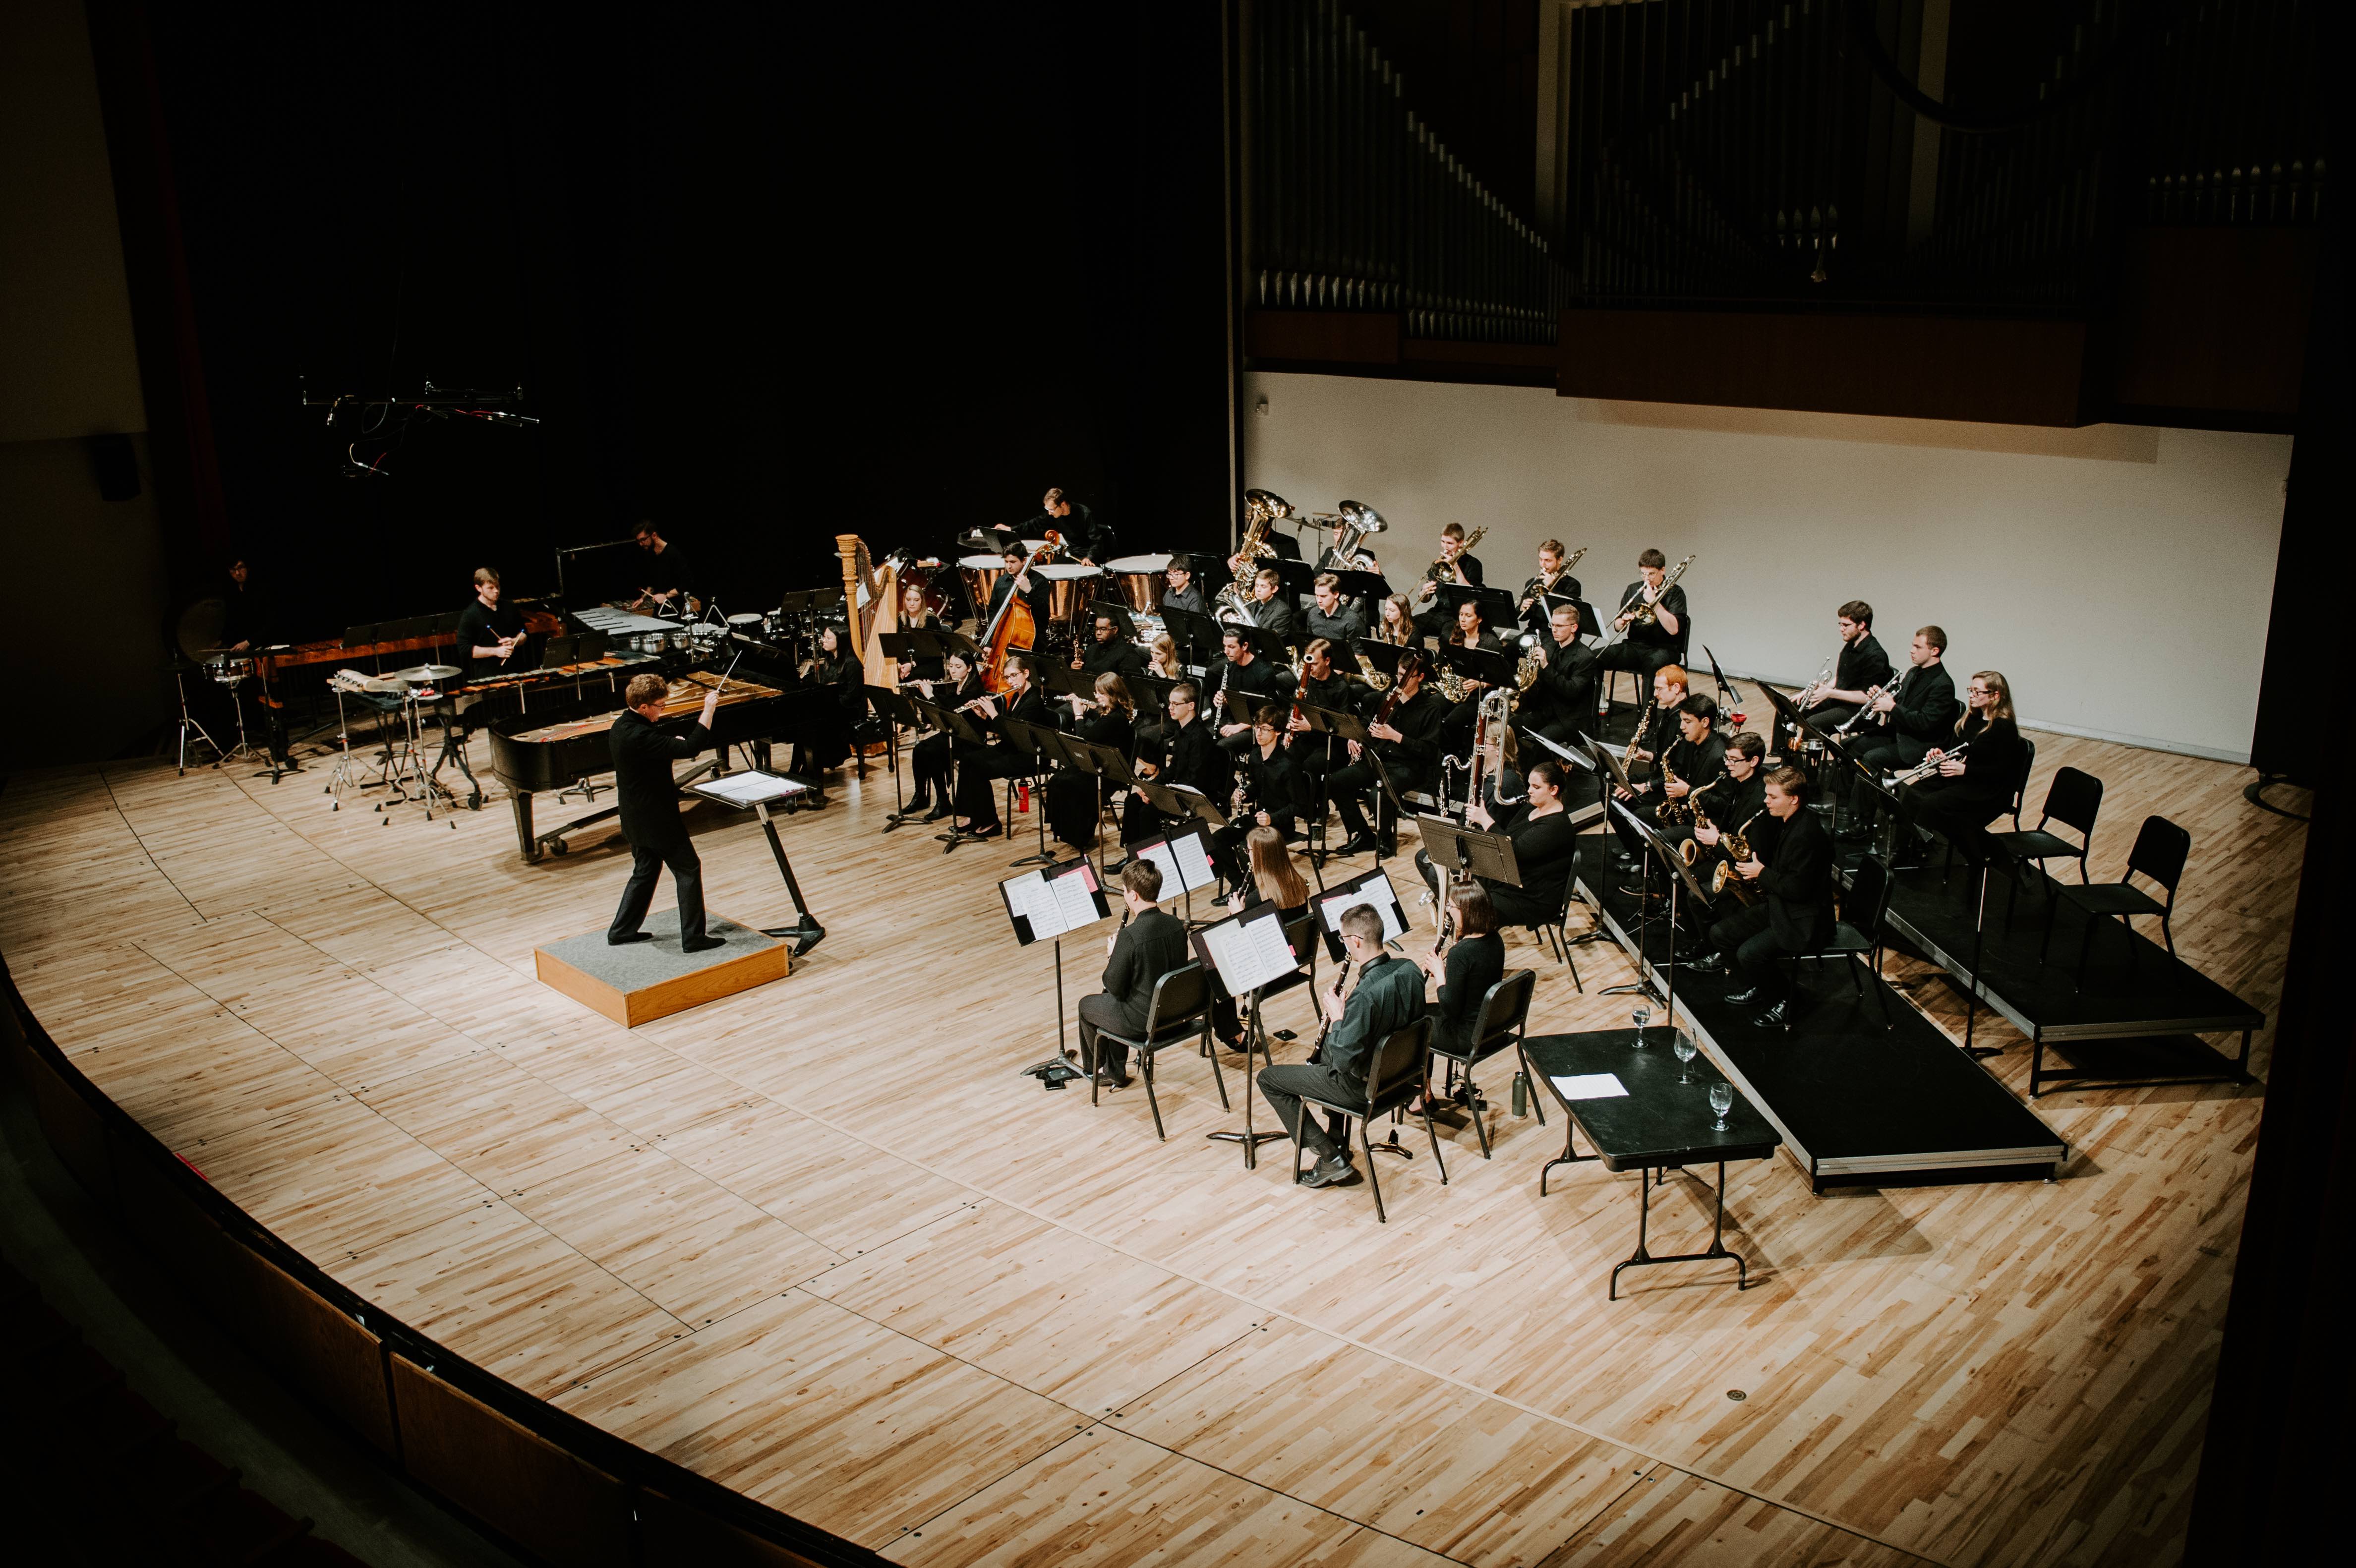 The Wind Ensemble presents "Catharsis" on Oct. 3 in Kimball Recital Hall.